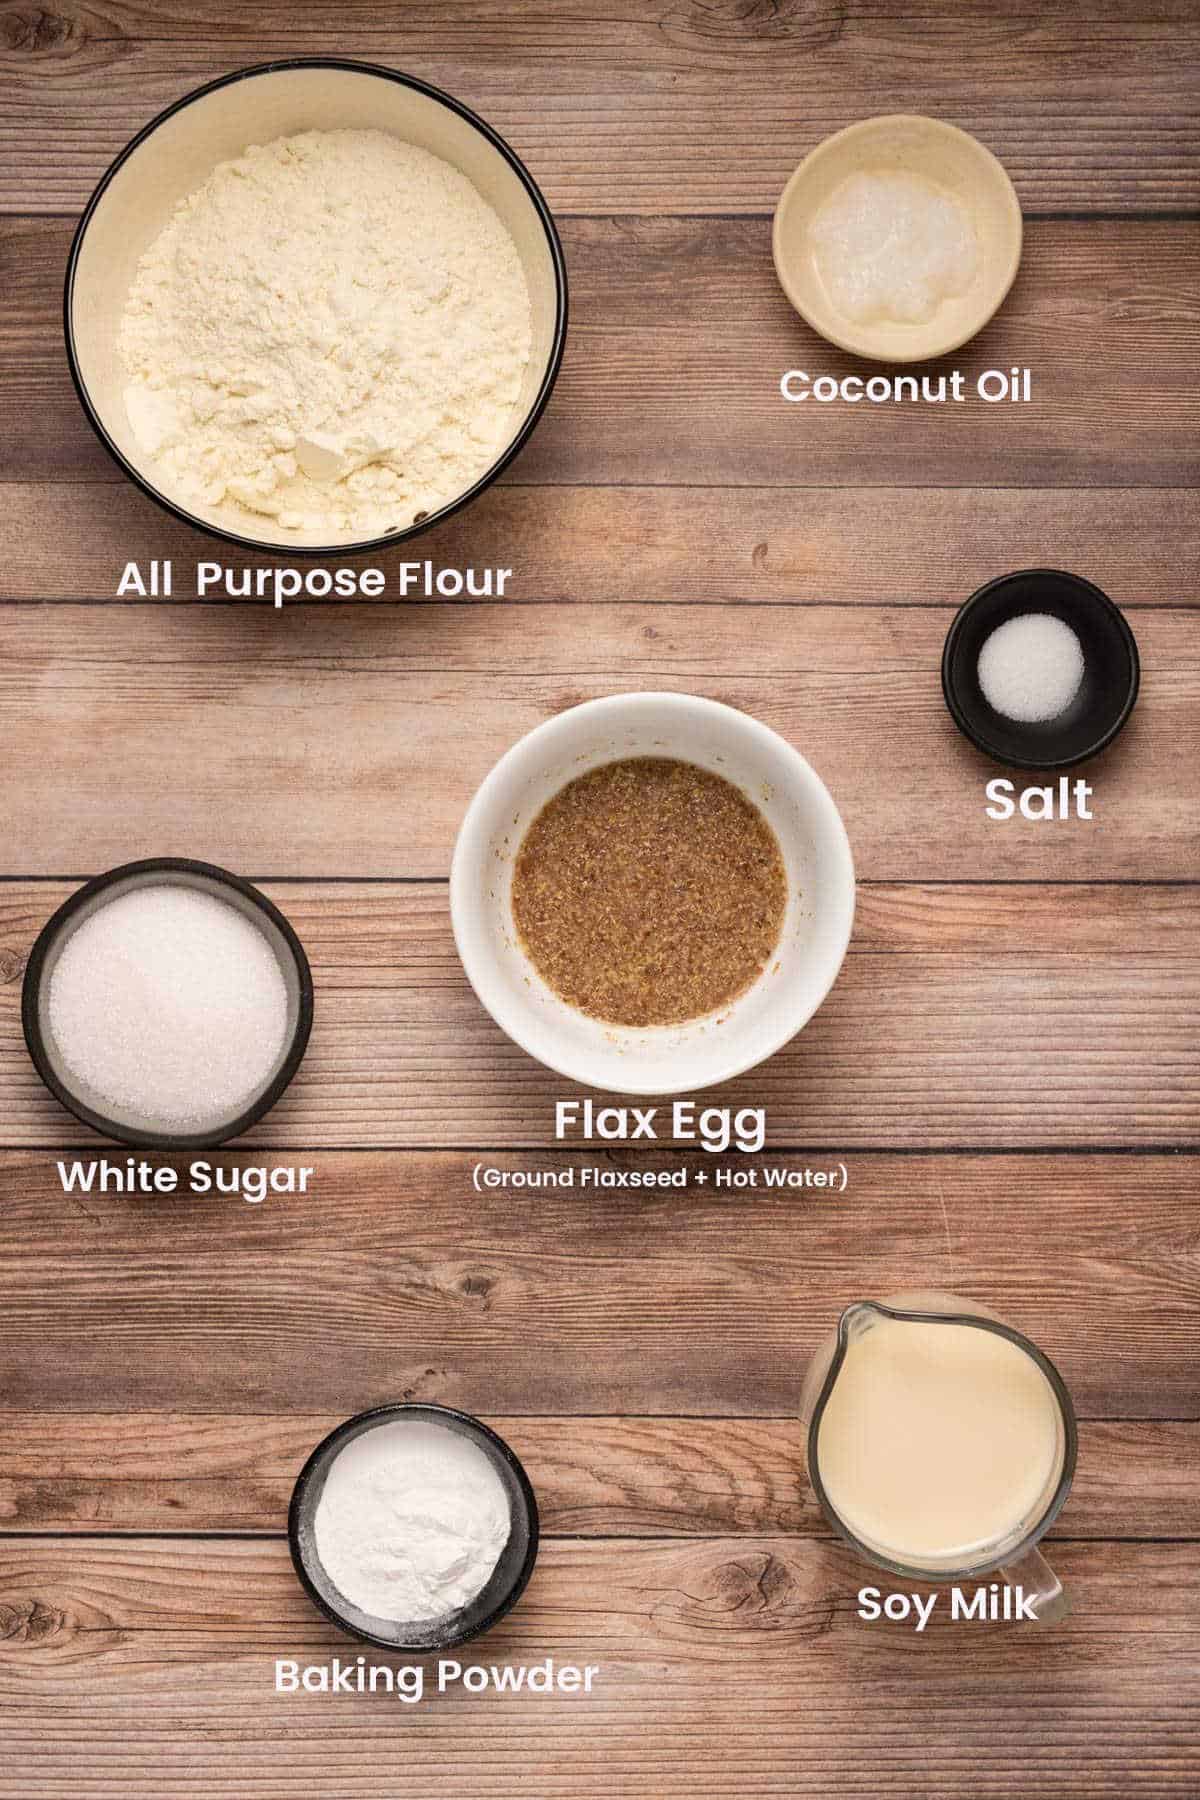 Photo of the ingredients needed to make pancakes.